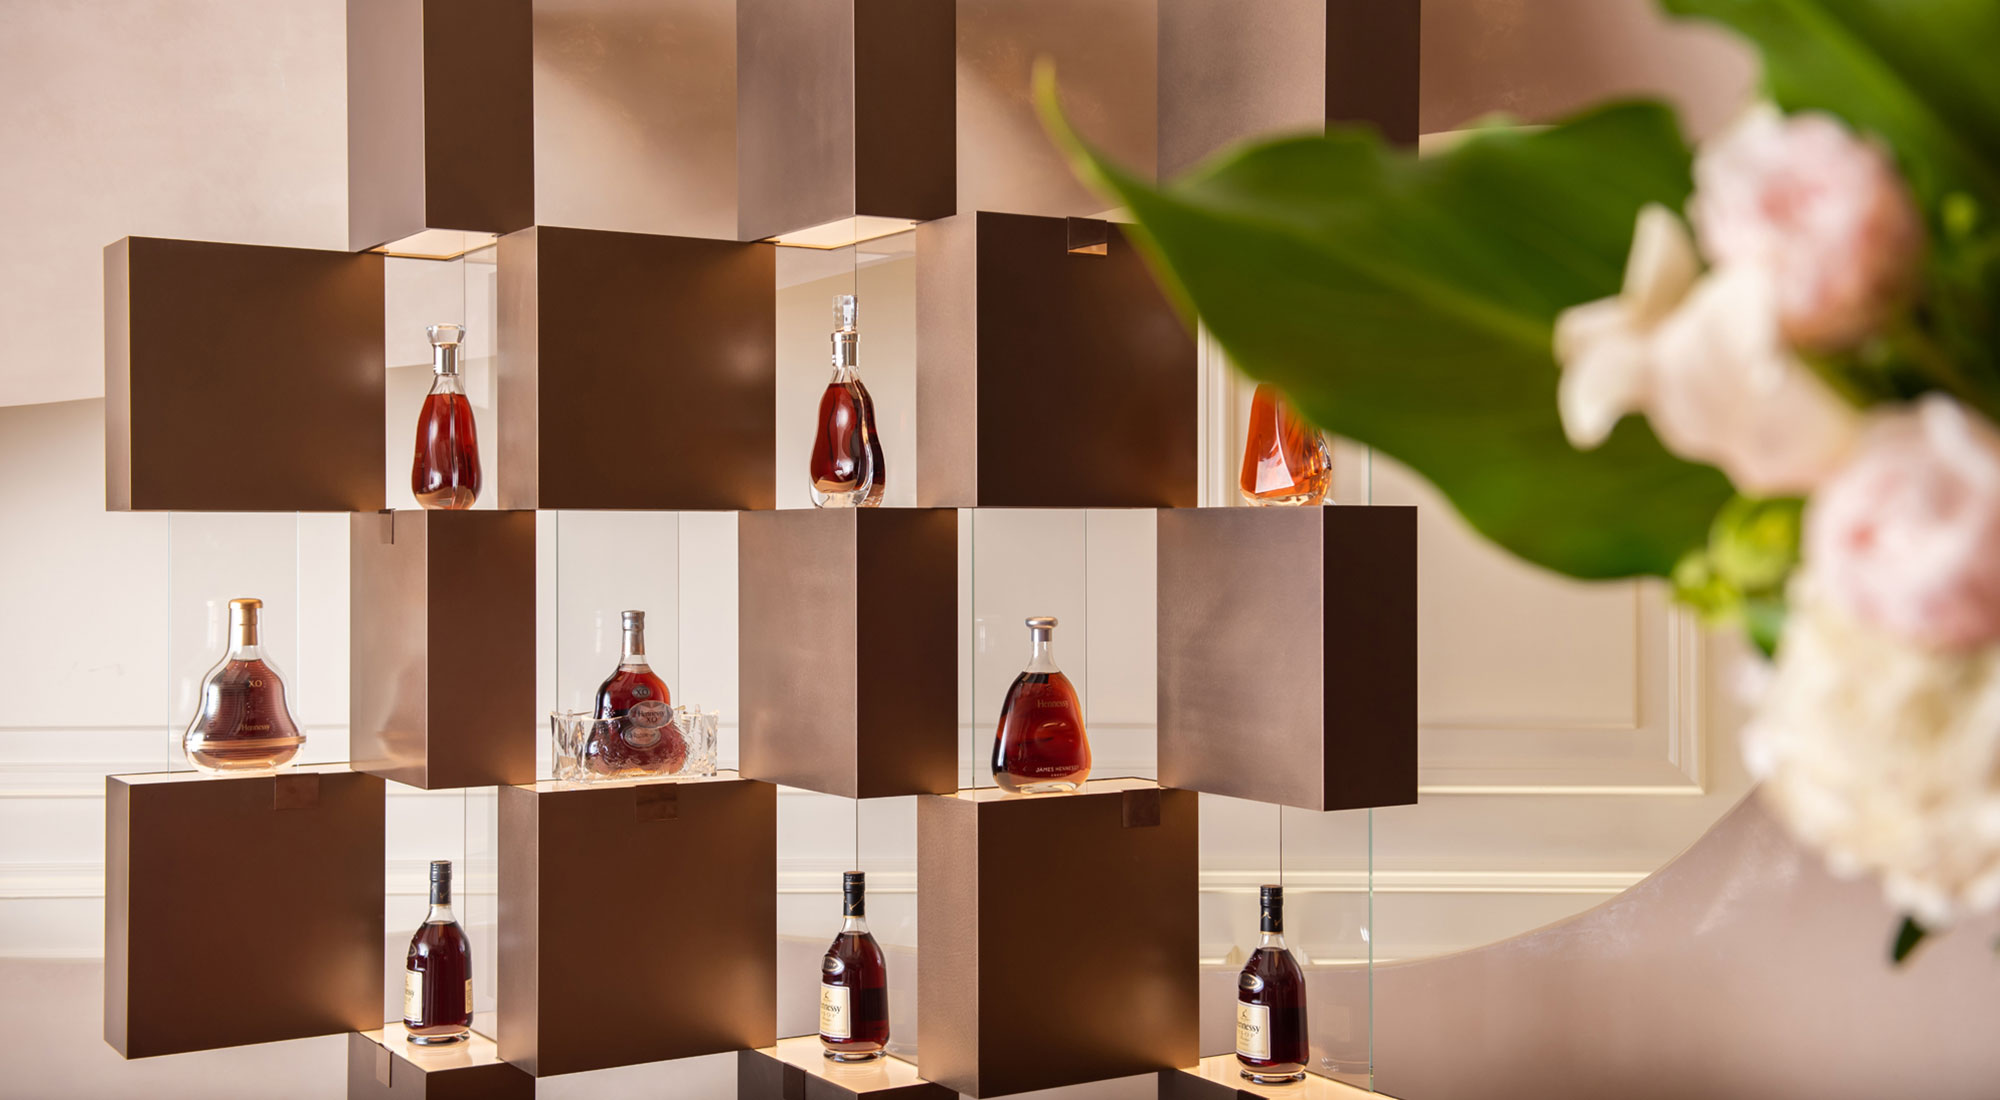 Moët Hennessy inaugurates a new contemporary concept for Les